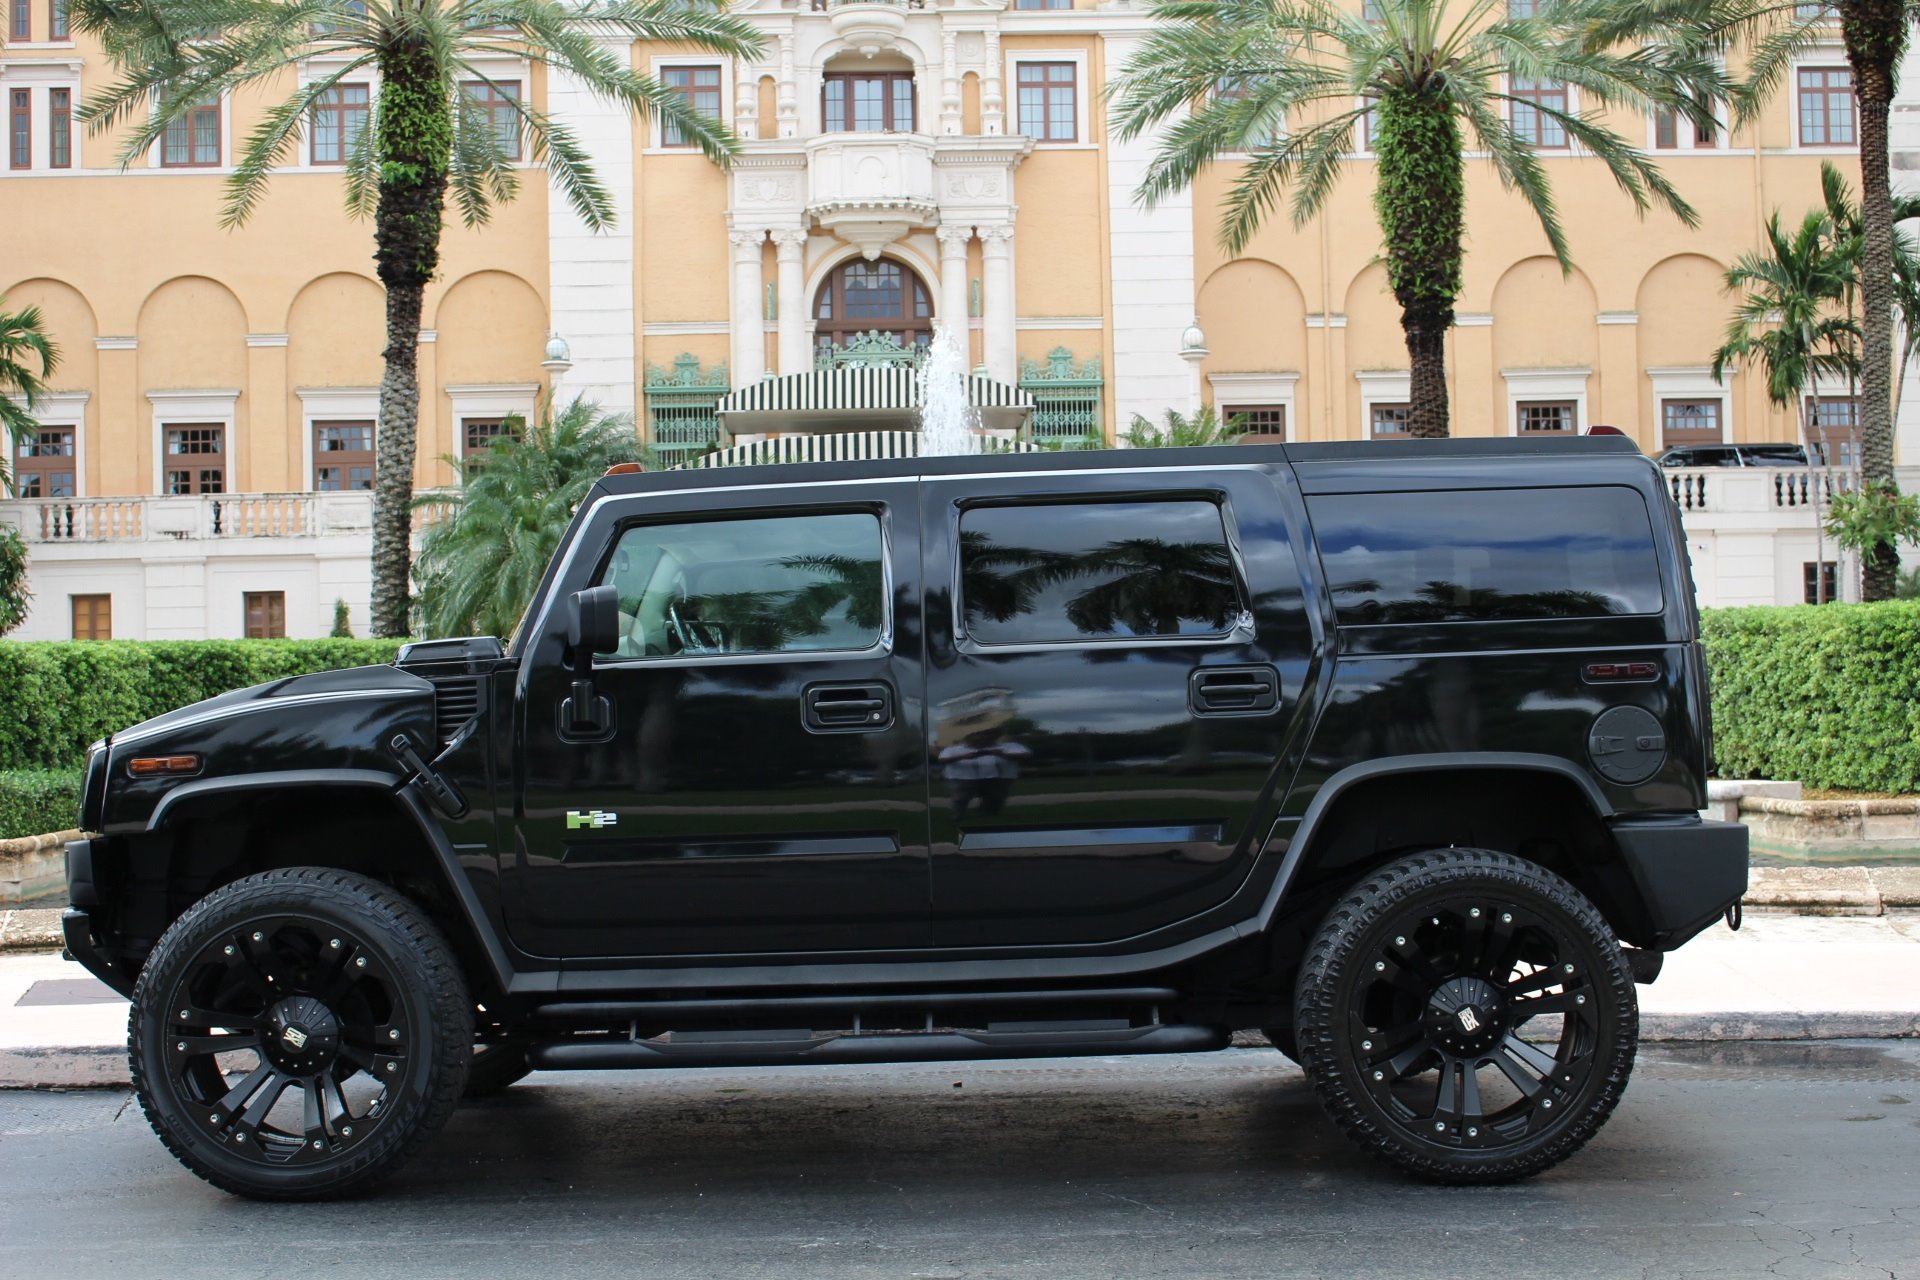 Used 2004 HUMMER H2 Lux Series for sale Sold at The Gables Sports Cars in Miami FL 33146 2